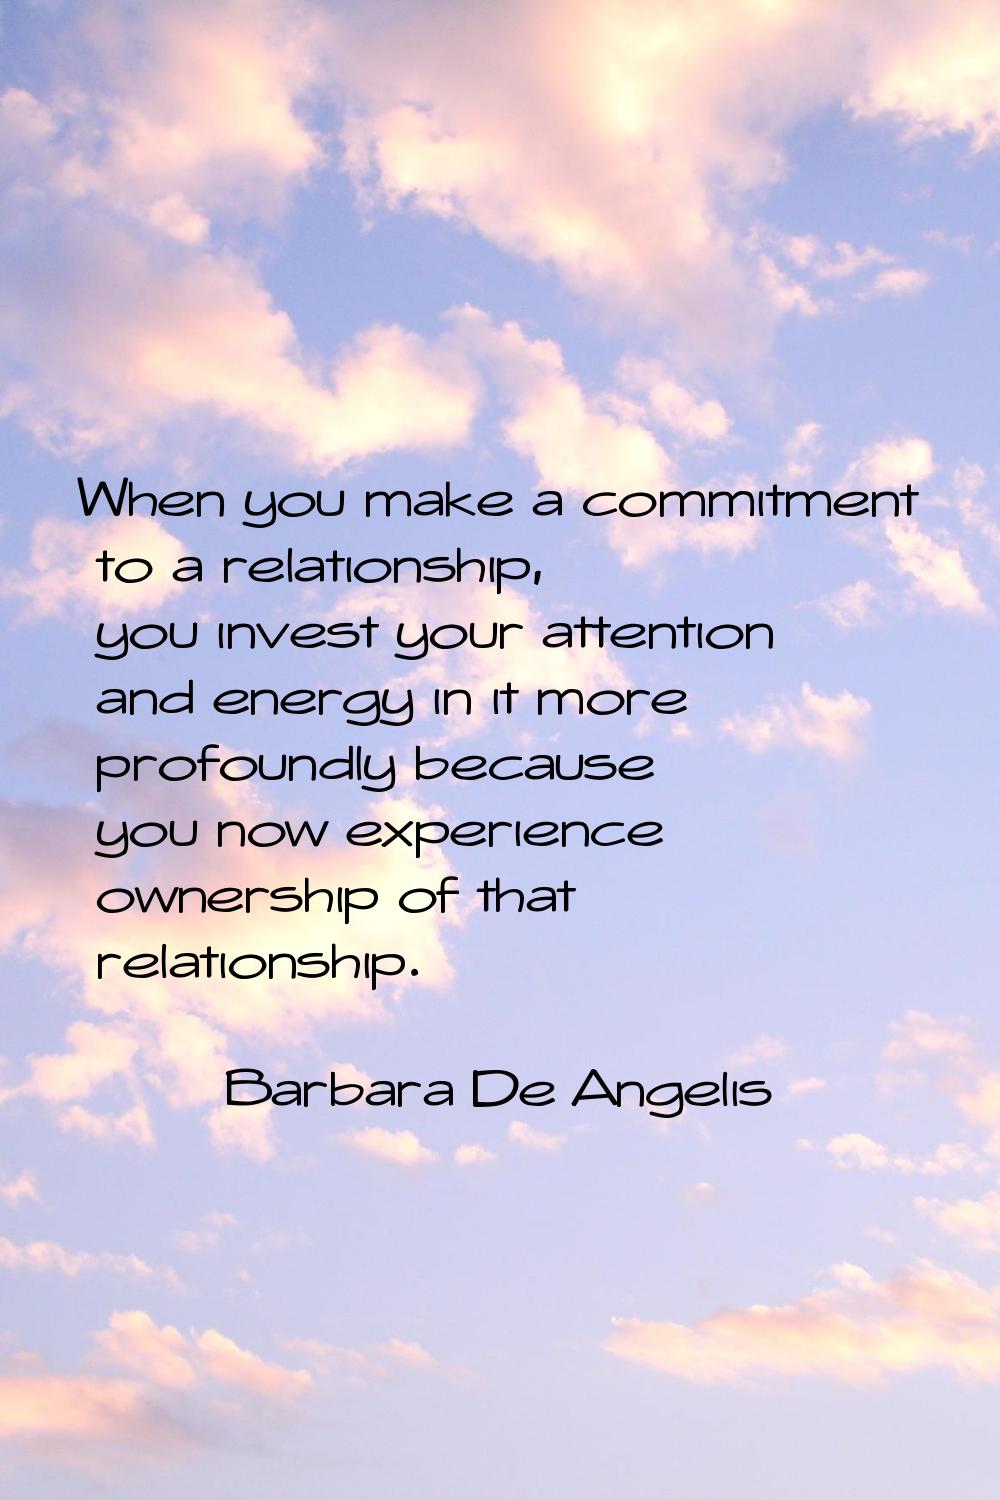 When you make a commitment to a relationship, you invest your attention and energy in it more profo